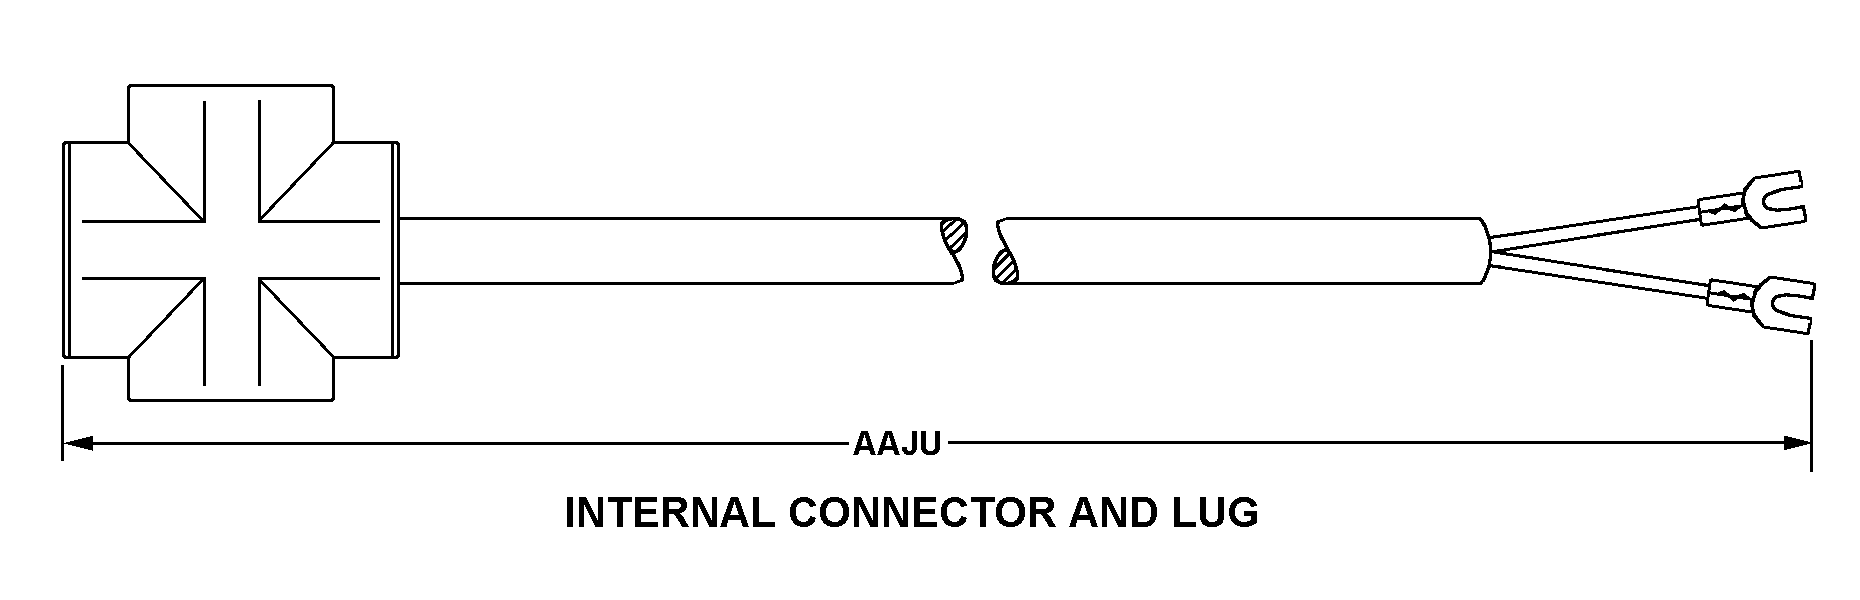 INTERNAL CONNECTOR AND LUG style nsn 5995-00-161-4666